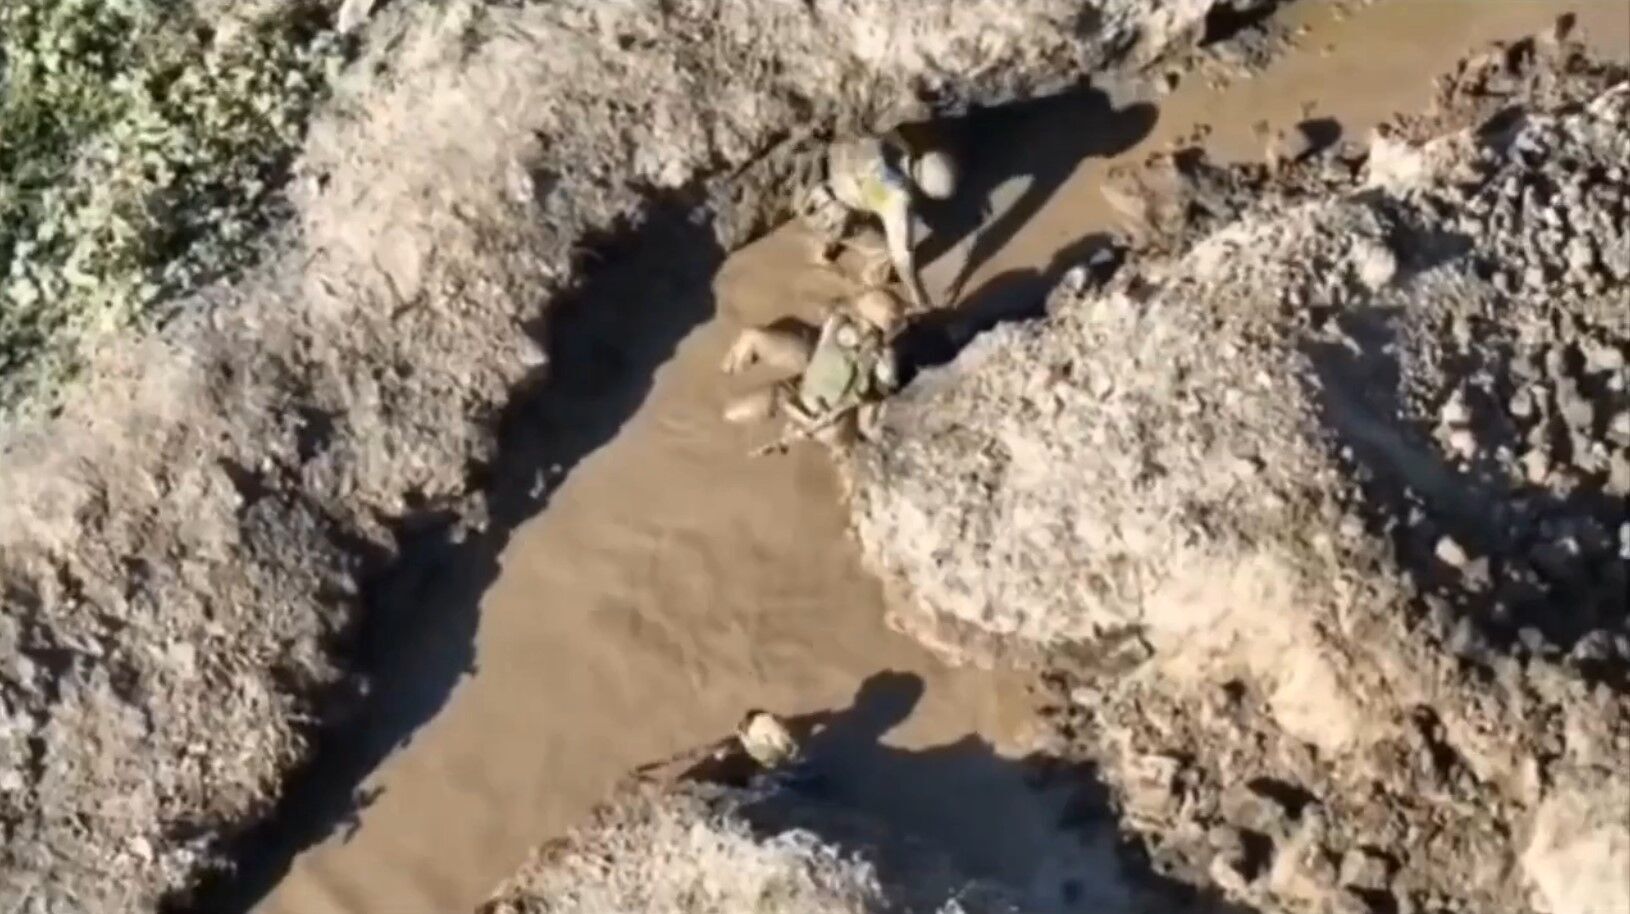 AFU soldiers prepare for assaults in extremely difficult conditions: footage of flooded trenches appeared 